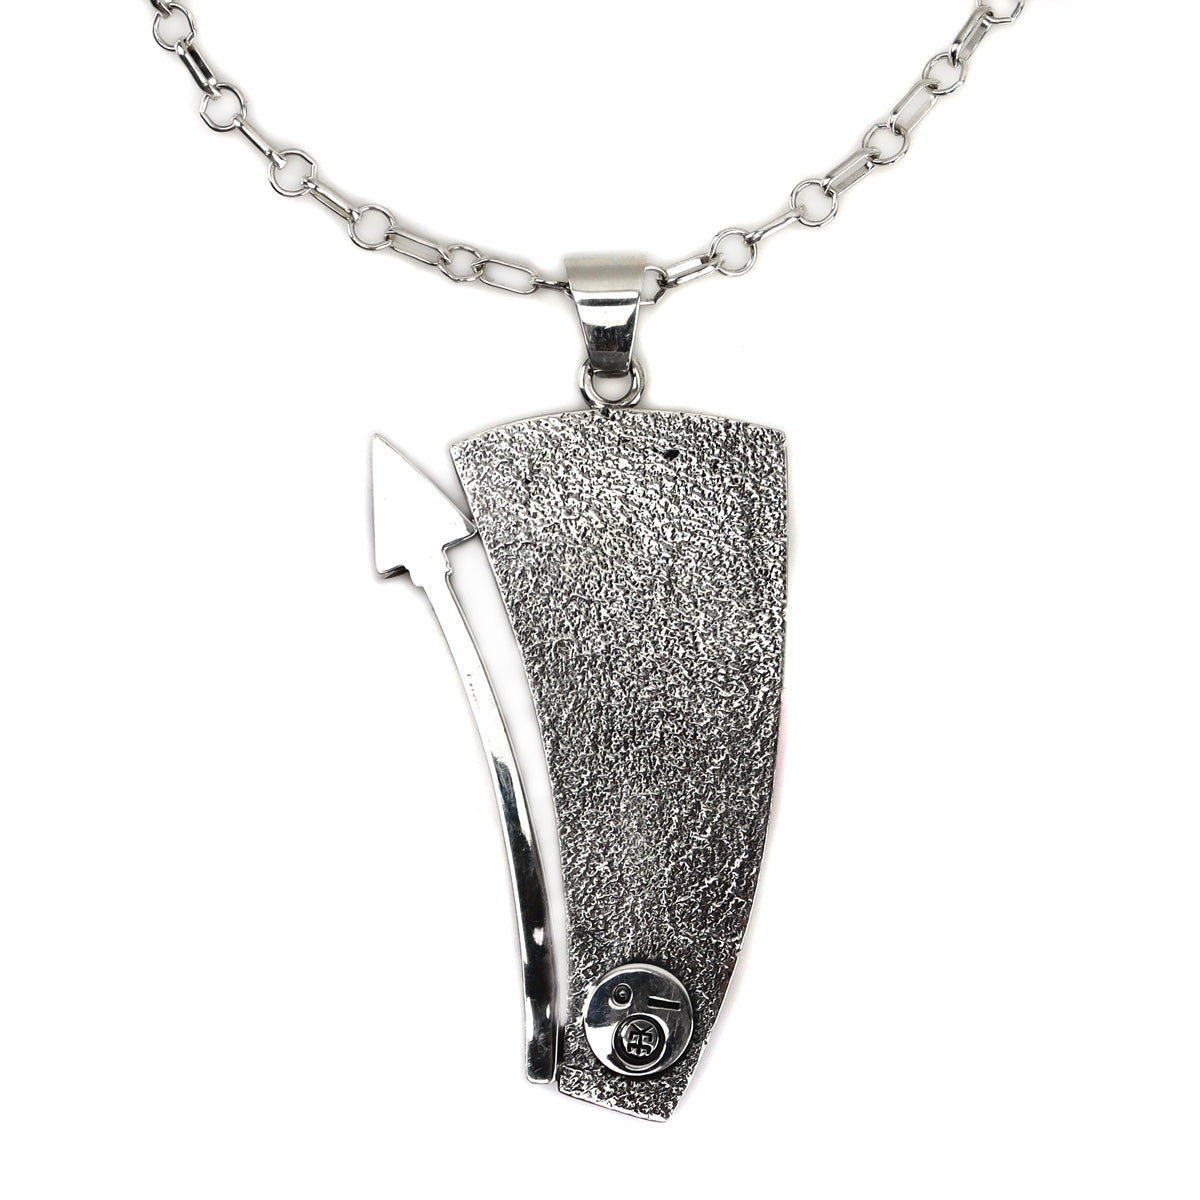 Roy Talahaftewa - Hopi Contemporary Multi-Stone and Sterling Silver Tufacast Lone Arrow Design Necklace, 20" length, 3.5" x 1.75" pendant (J14998) 4